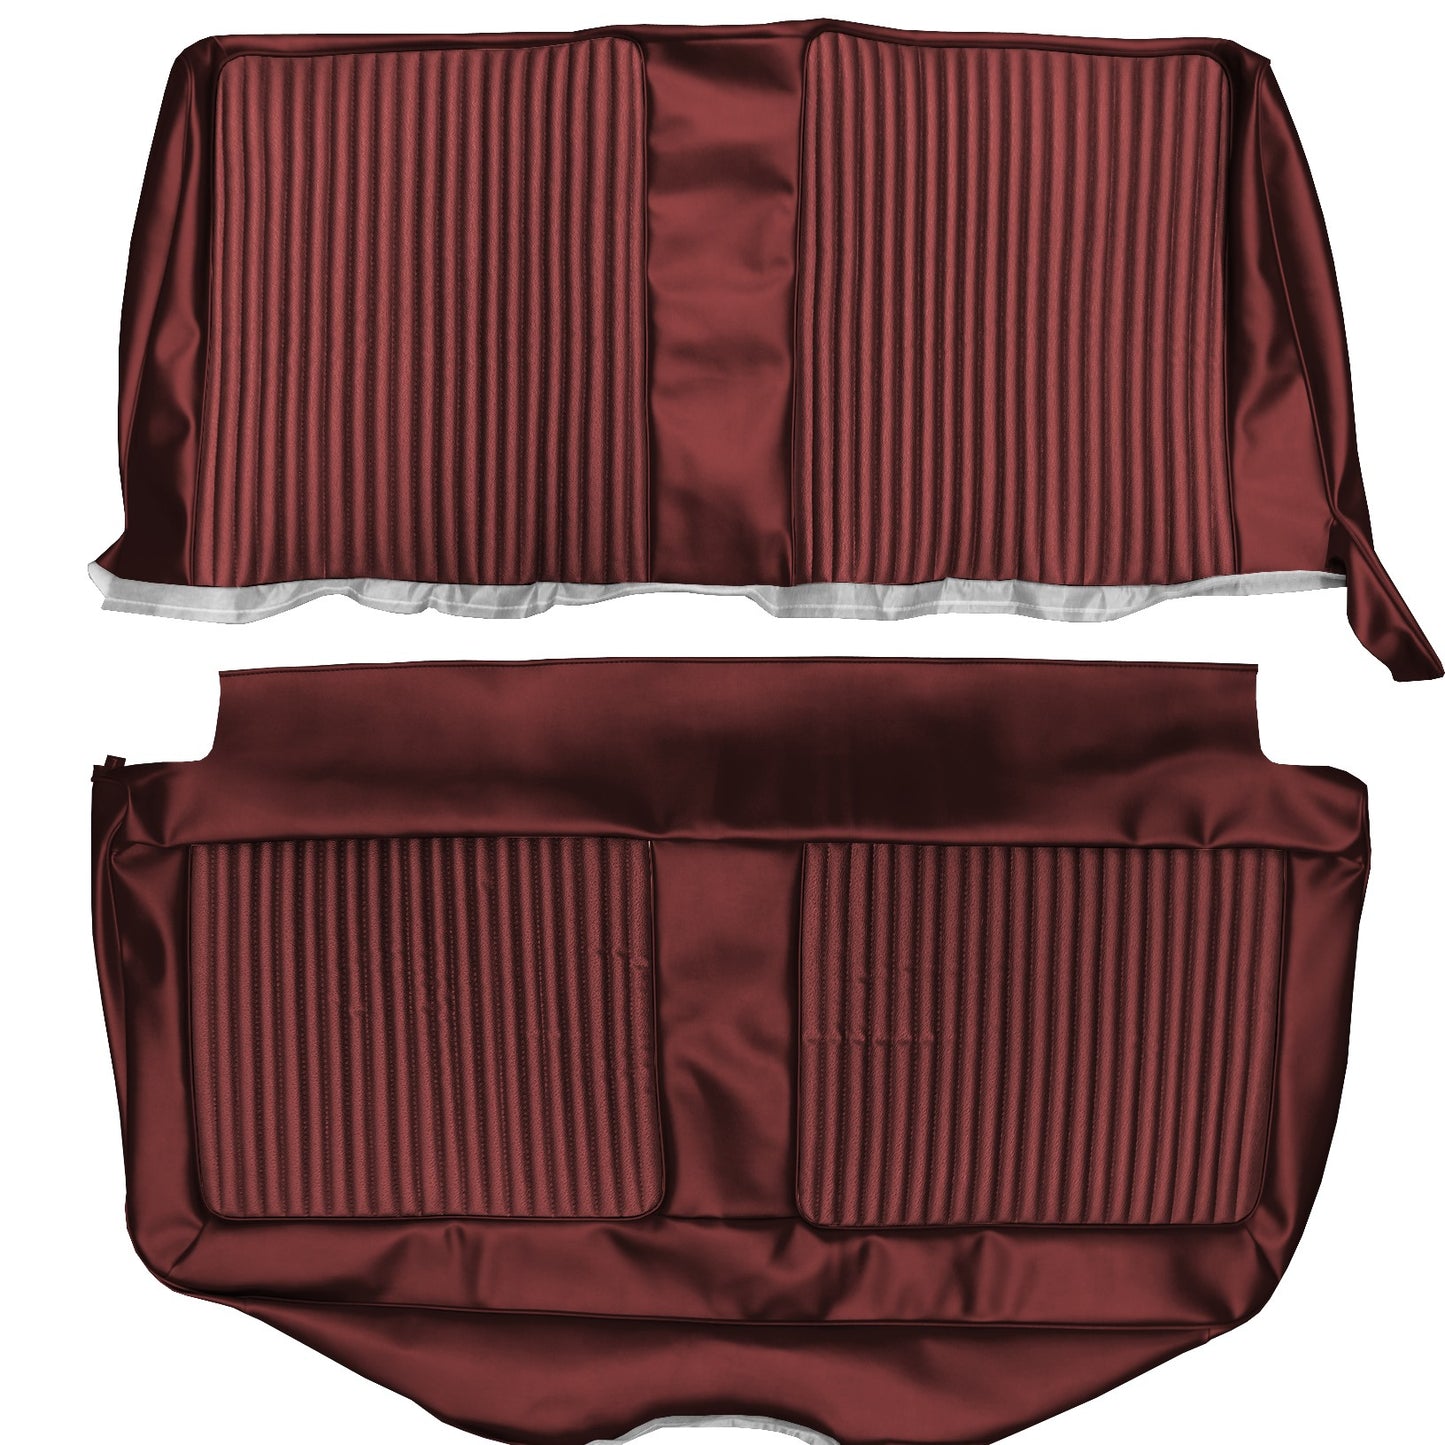 66 BELVEDERE II 4-DR/WAGON BENCH SEAT UPHOLSTERY- RED